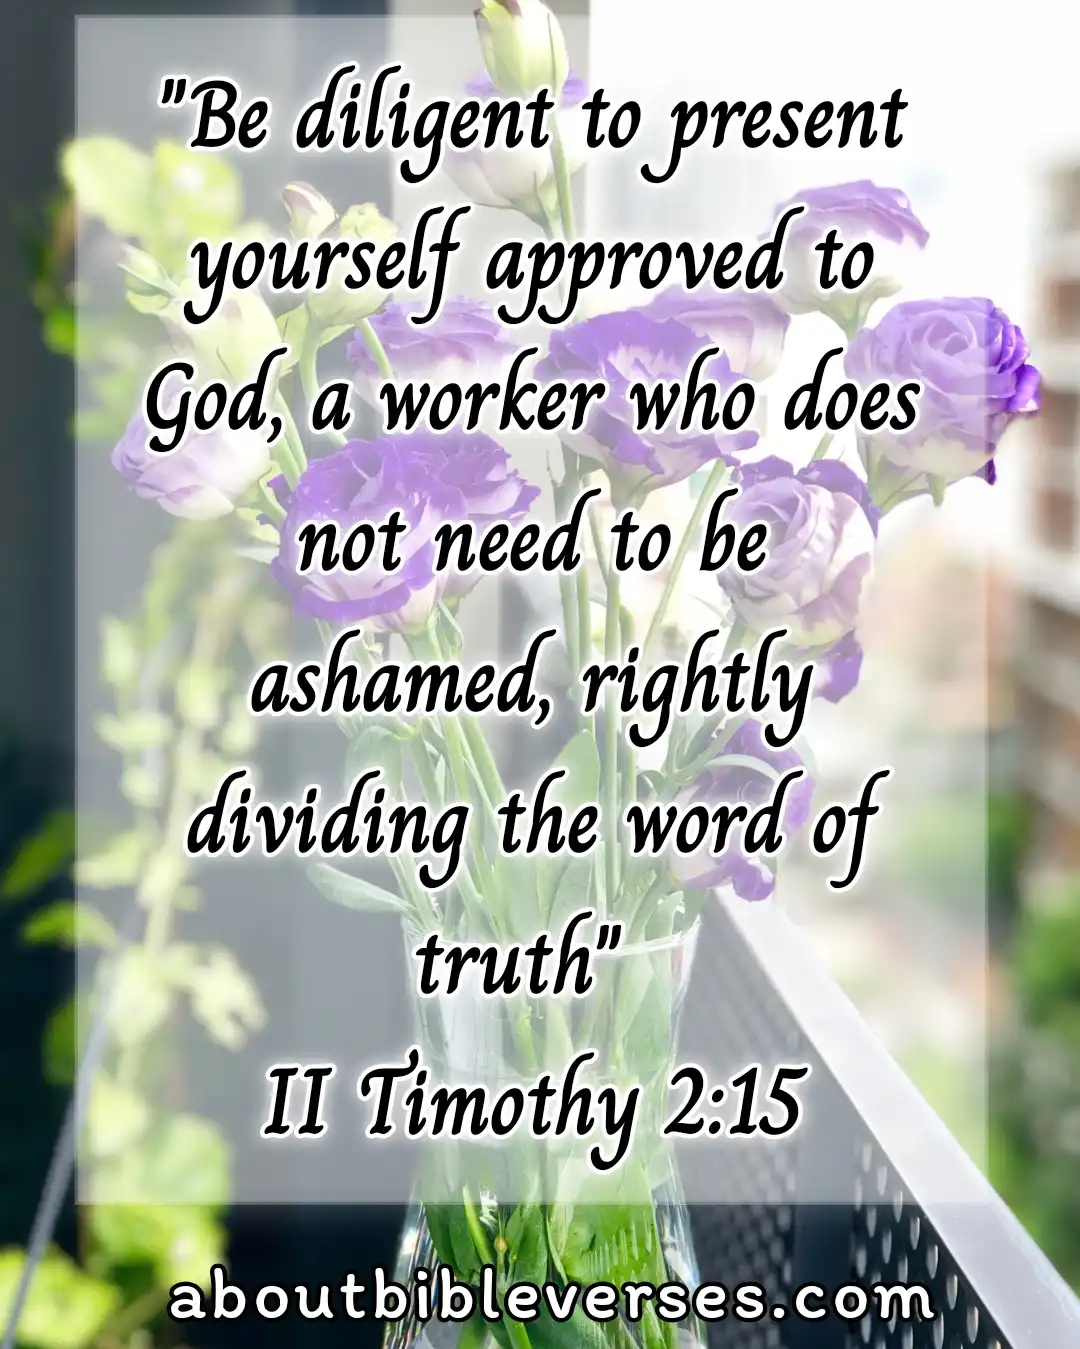 Bible Verses About Affirmation (2 Timothy 2:15)